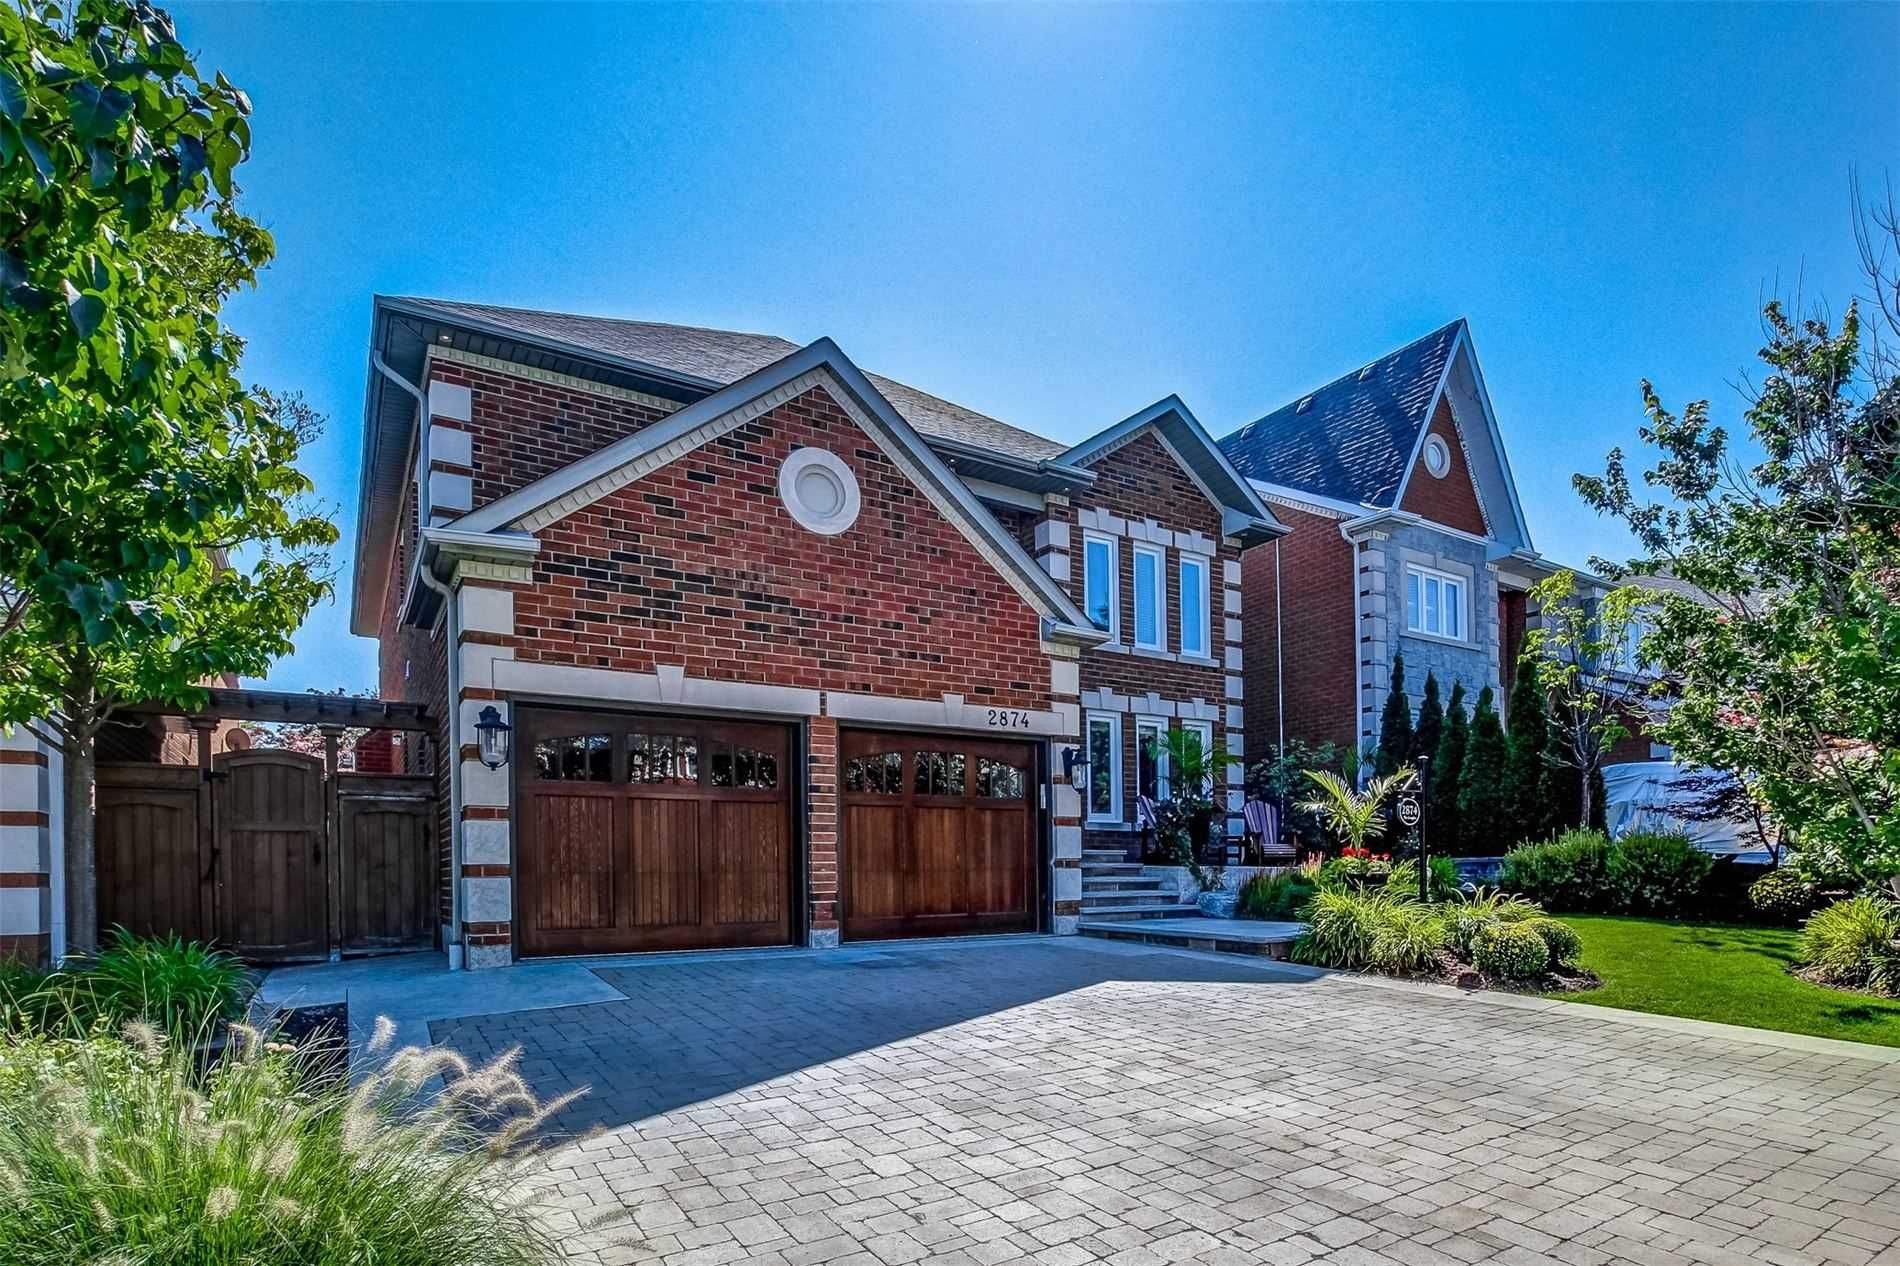 Main Photo: 2874 Termini Terrace in Mississauga: Central Erin Mills House (2-Storey) for sale : MLS®# W4569955